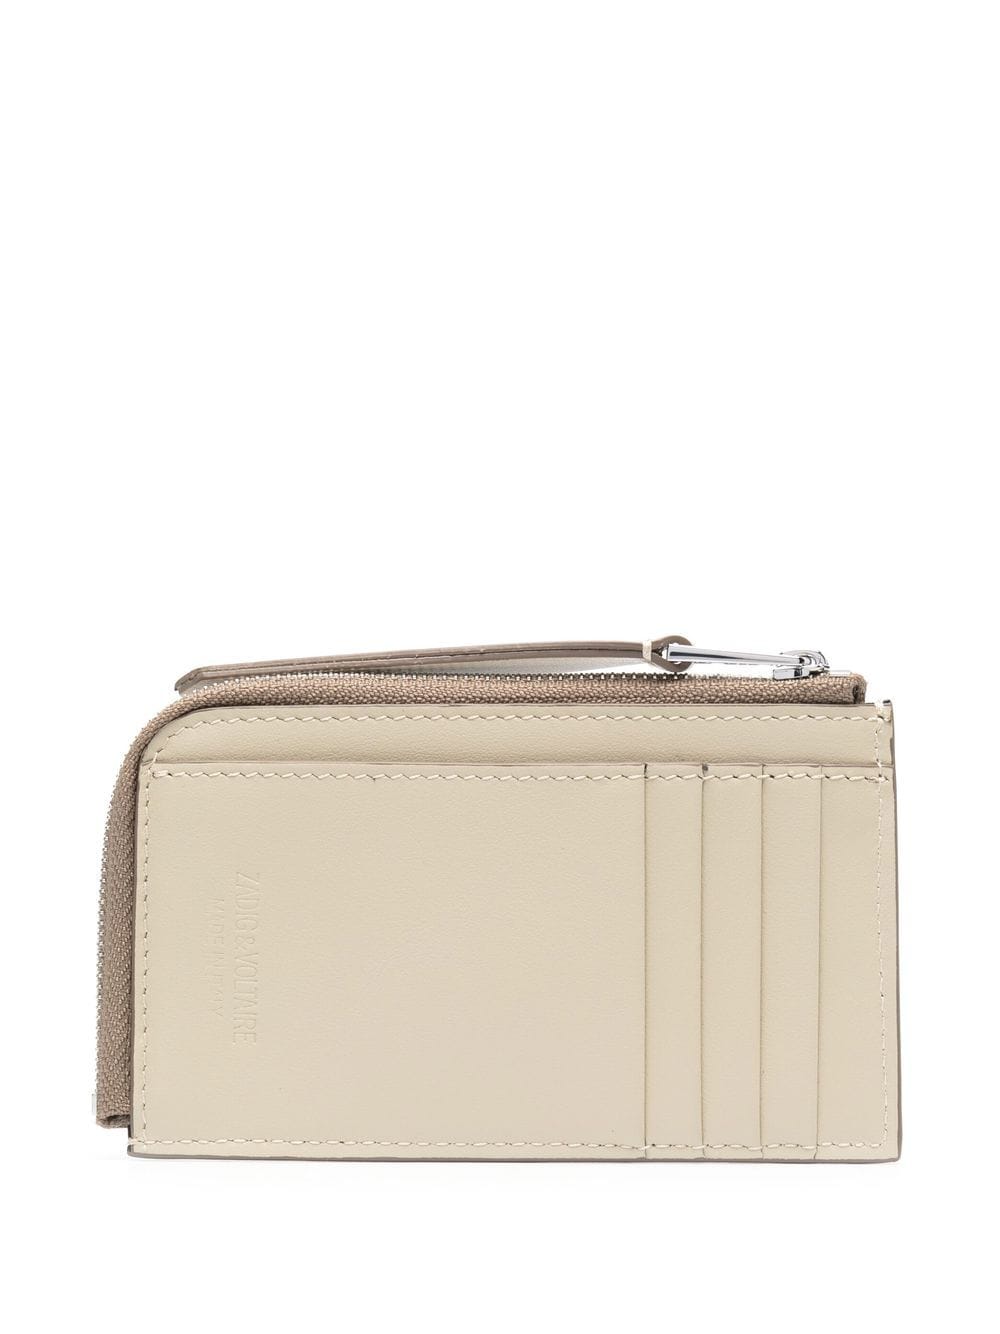 Zadig & Voltaire Zv Initial Card Holder In Relax | ModeSens